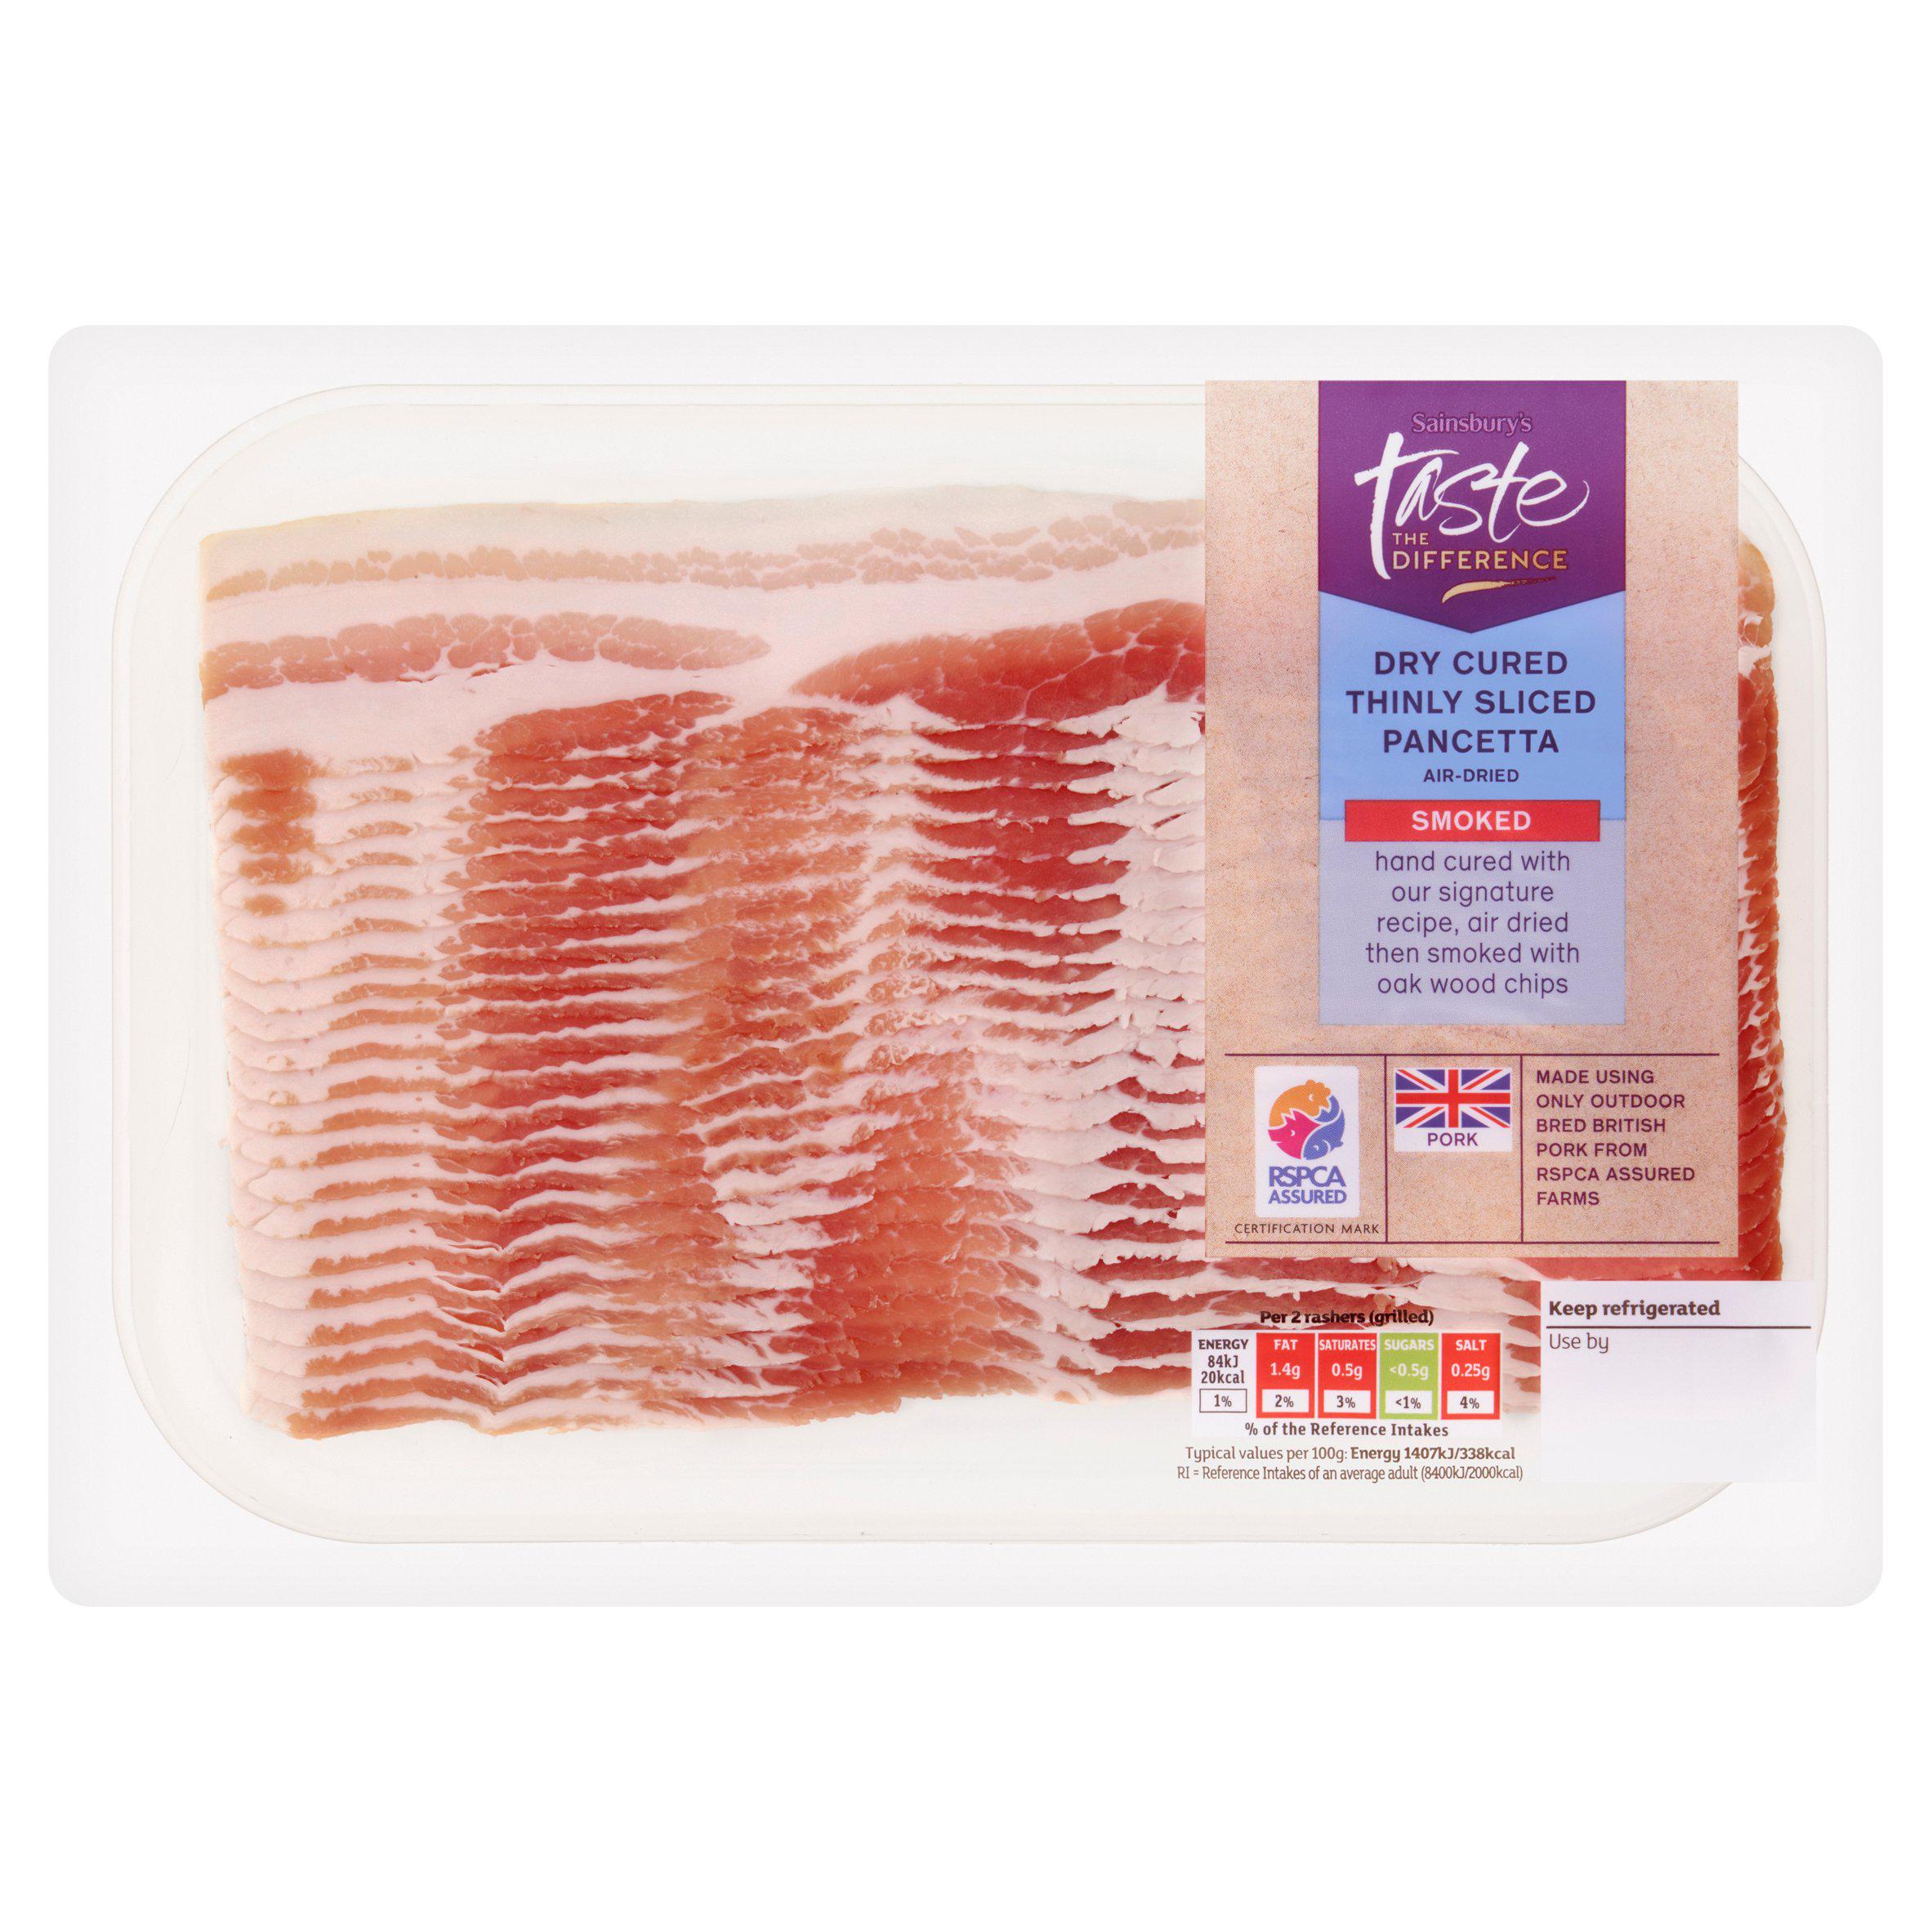 Sainsbury's Smoked Air-Dried Dry Cured Thinly Sliced Pancetta, Taste the Difference 180g